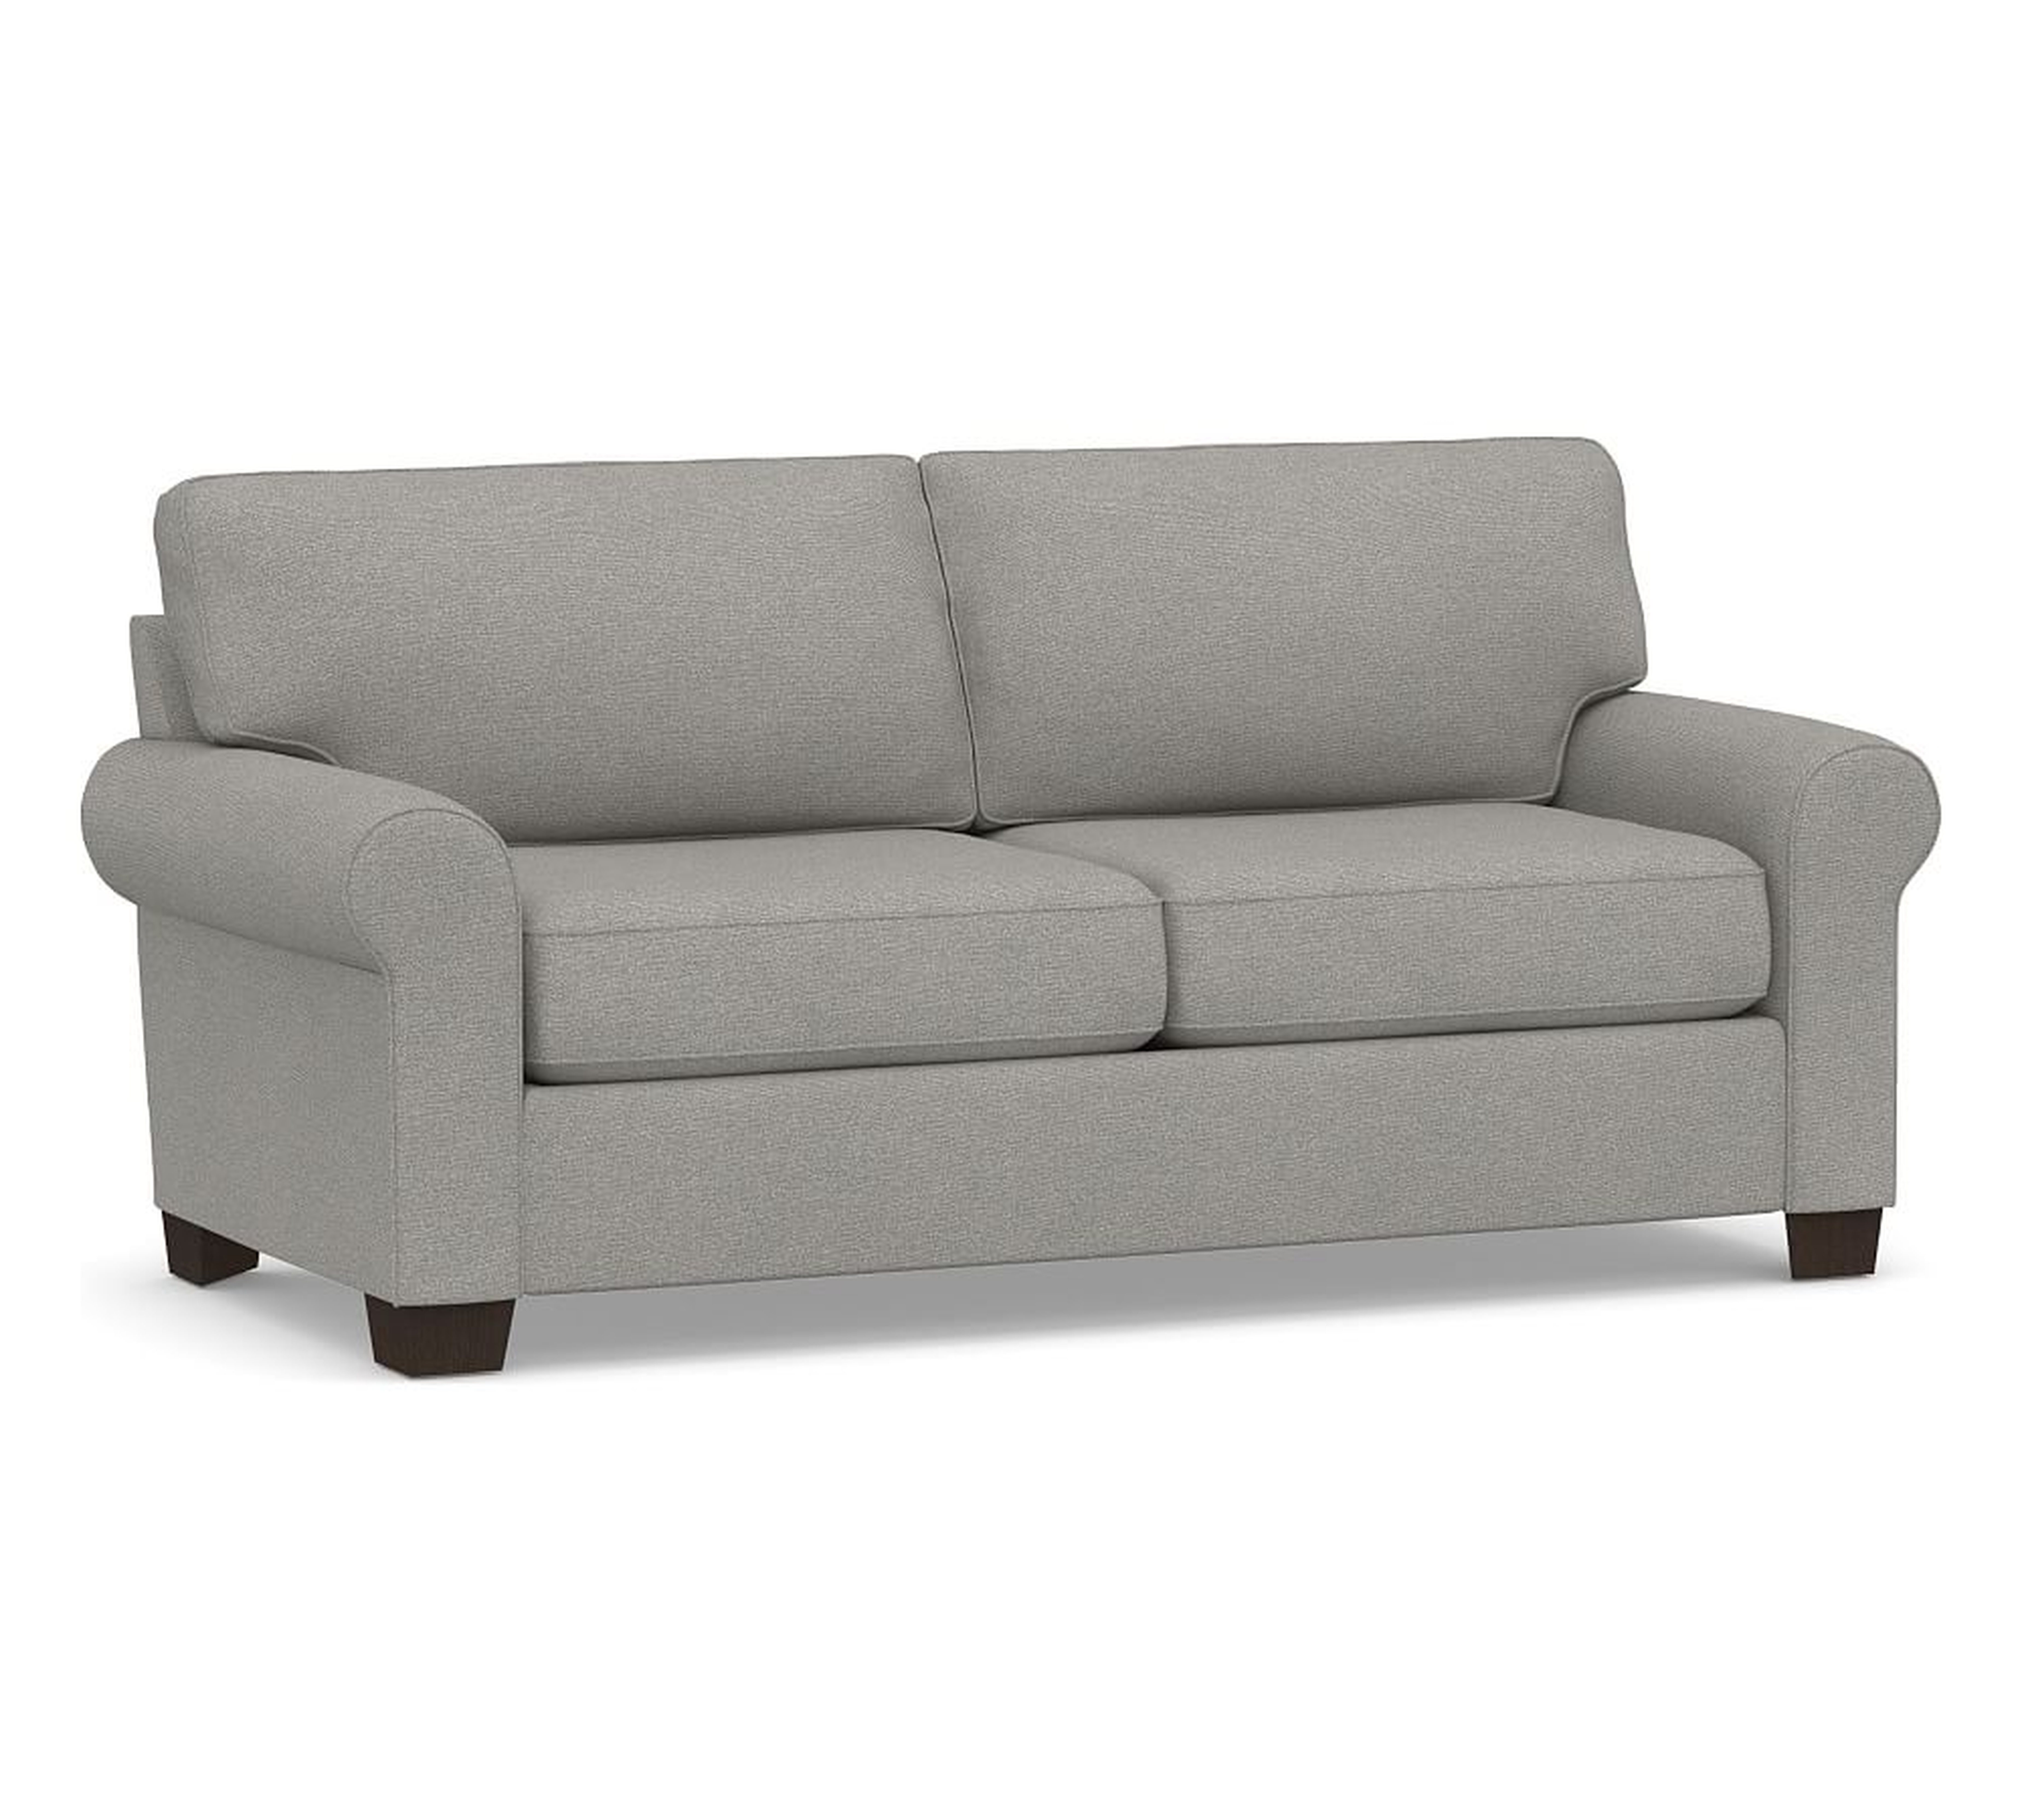 Buchanan Roll Arm Upholstered Loveseat 79", Polyester Wrapped Cushions, Performance Heathered Basketweave Platinum - Pottery Barn